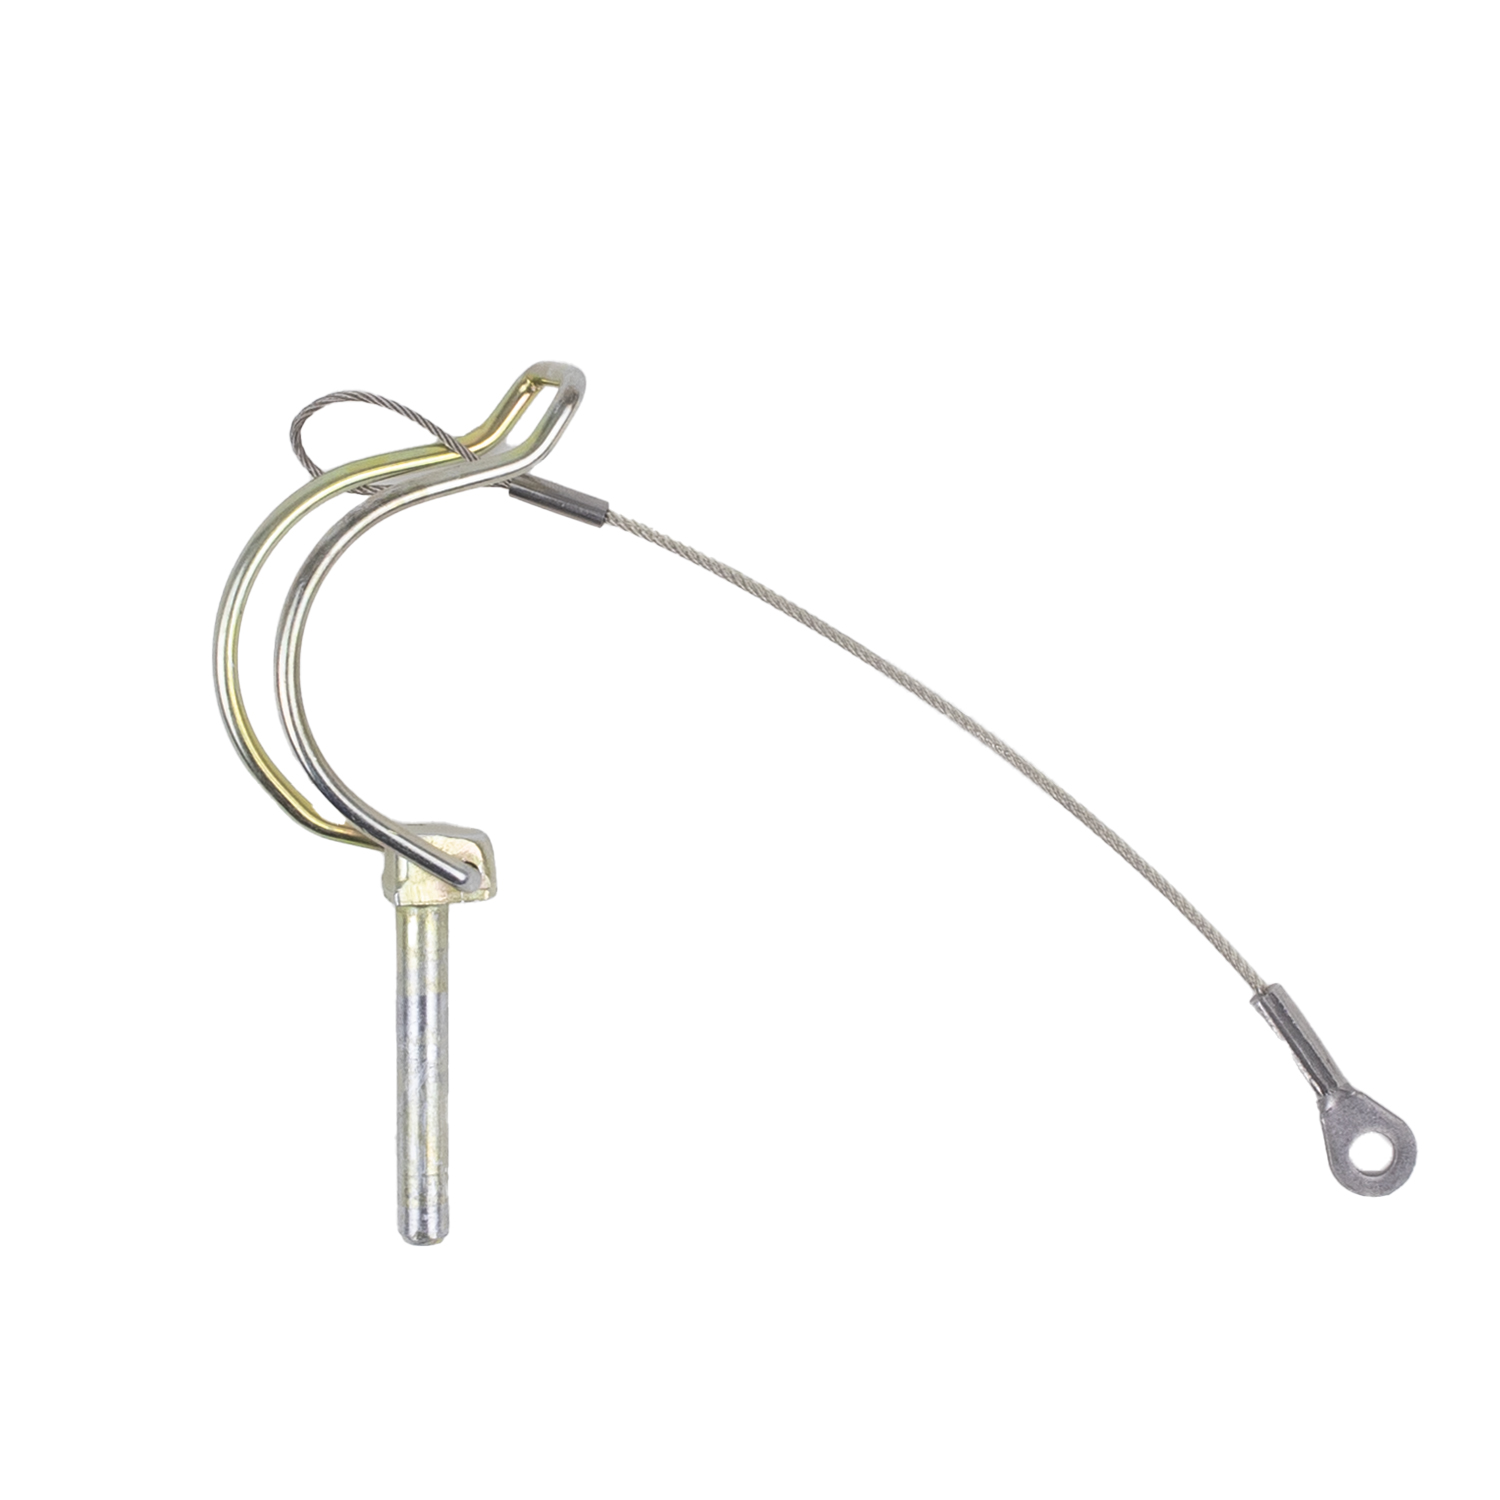 ADK Tethered Clevis Pin